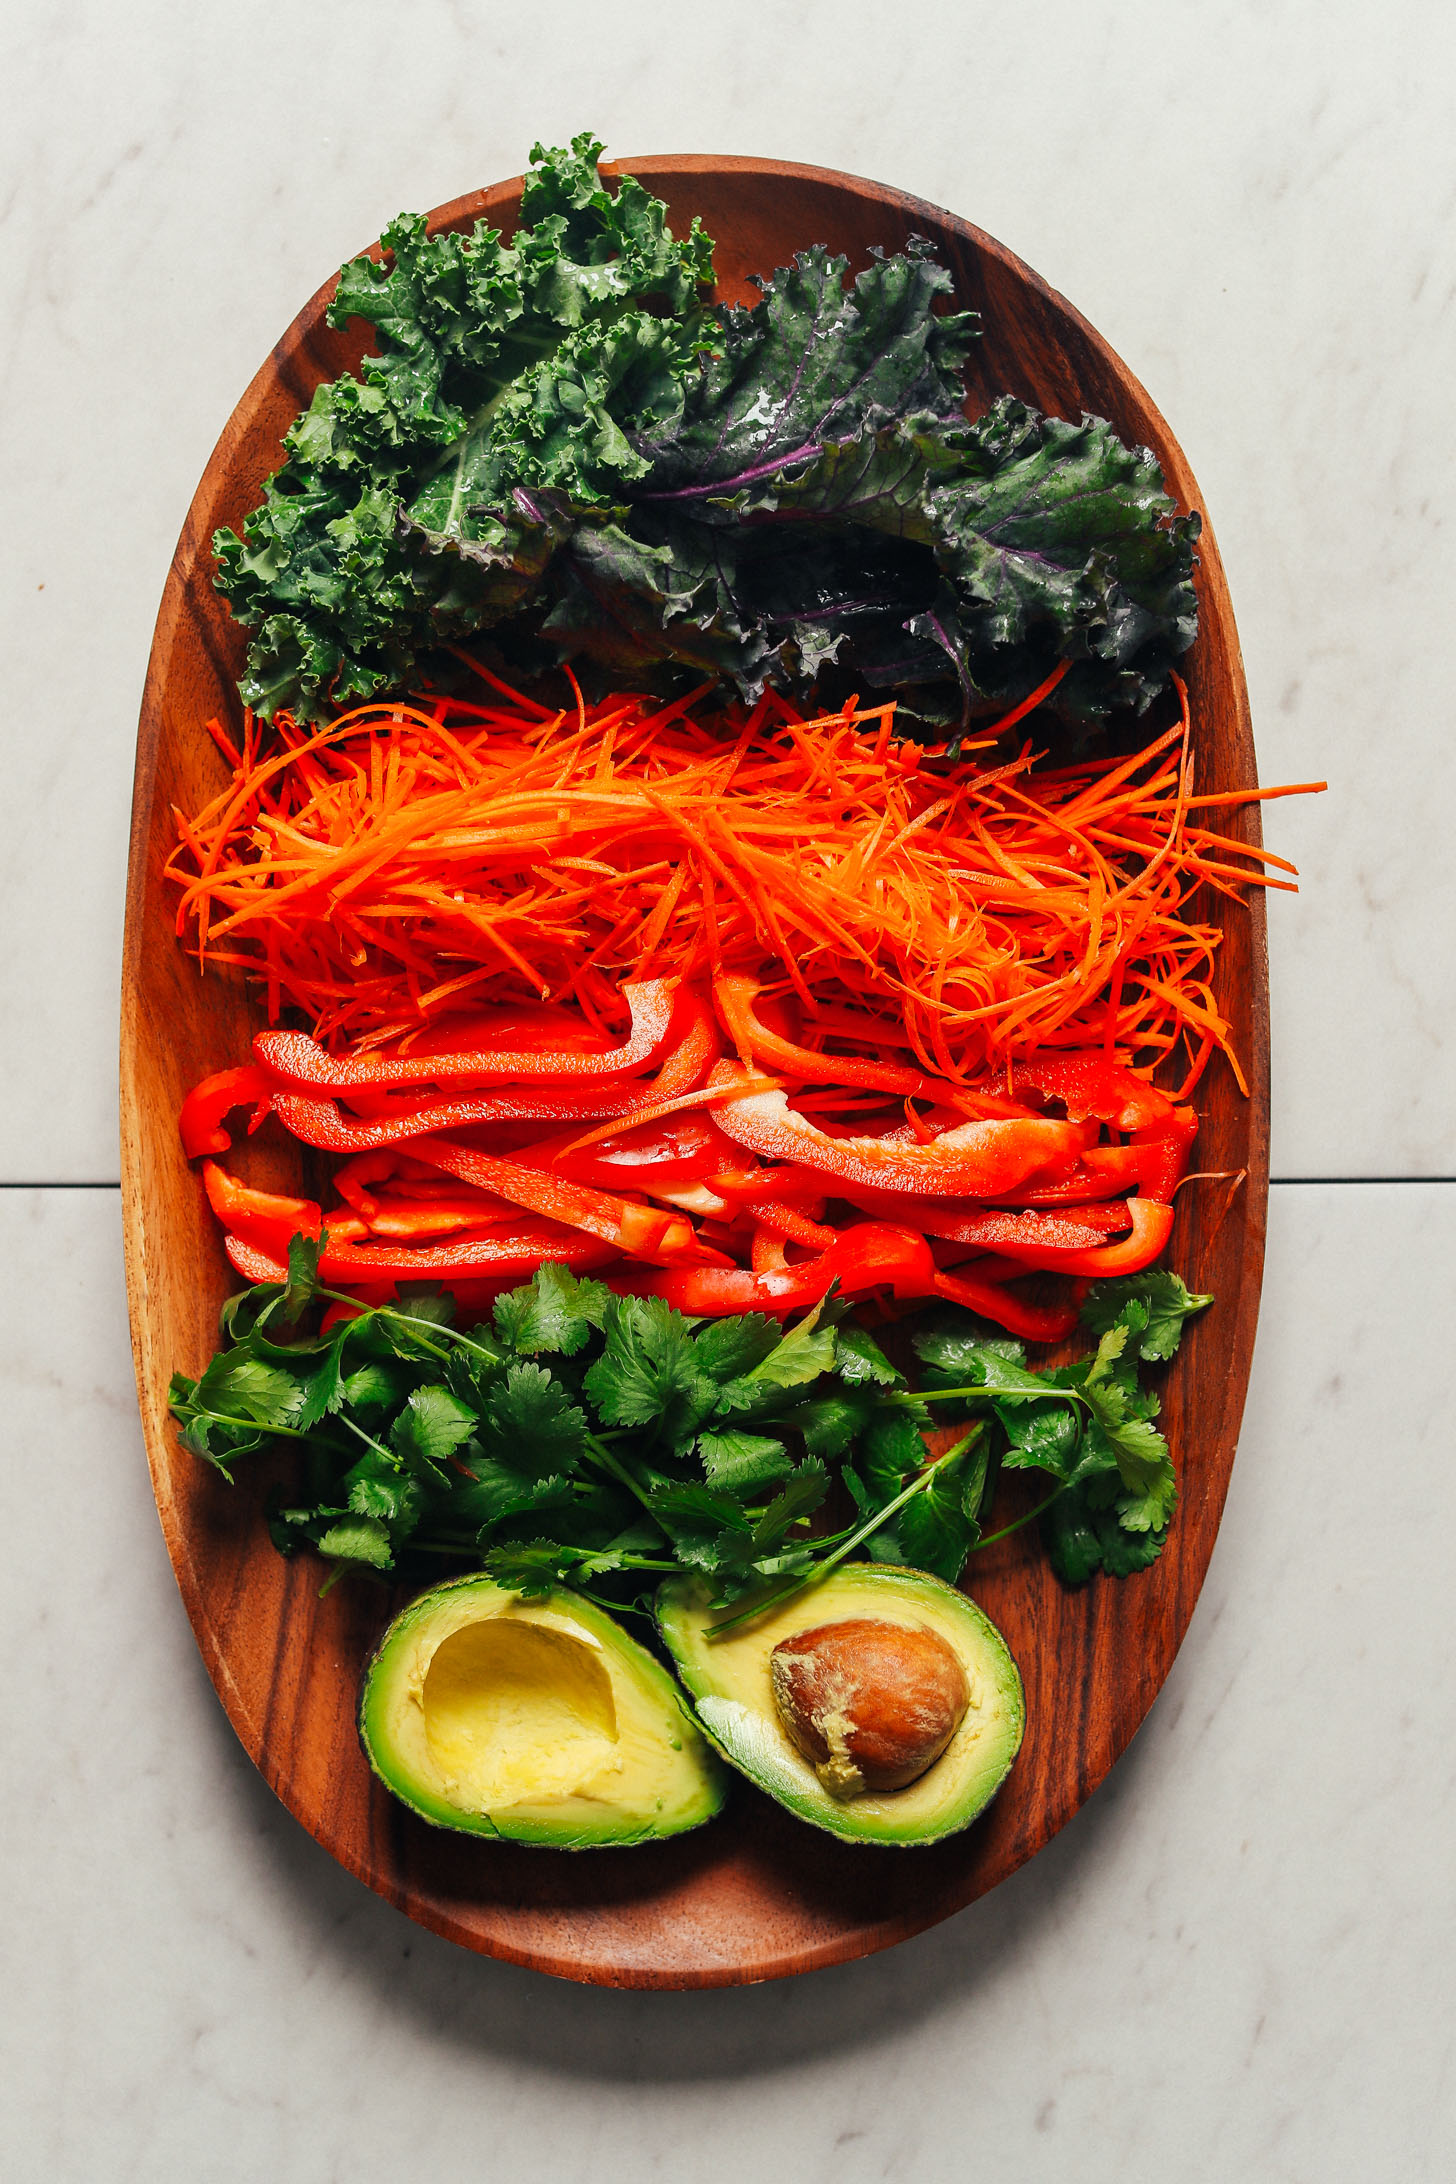 Platter of fresh vegetables including kale, shredded carrots, sliced red bell peppers, cilantro, and avocado